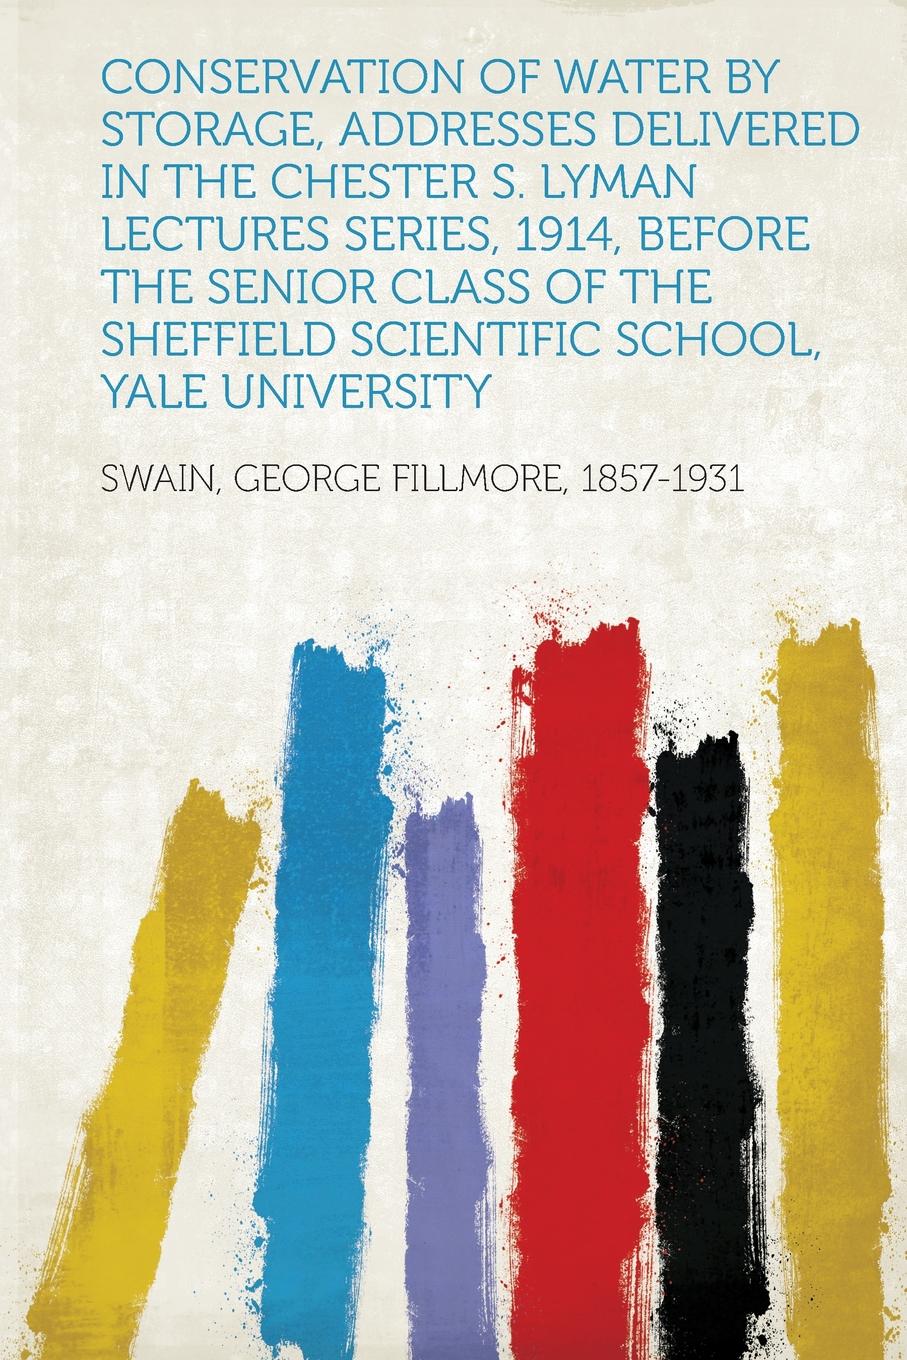 Conservation of Water by Storage, Addresses Delivered in the Chester S. Lyman Lectures Series, 1914, Before the Senior Class of the Sheffield Scientific School, Yale University